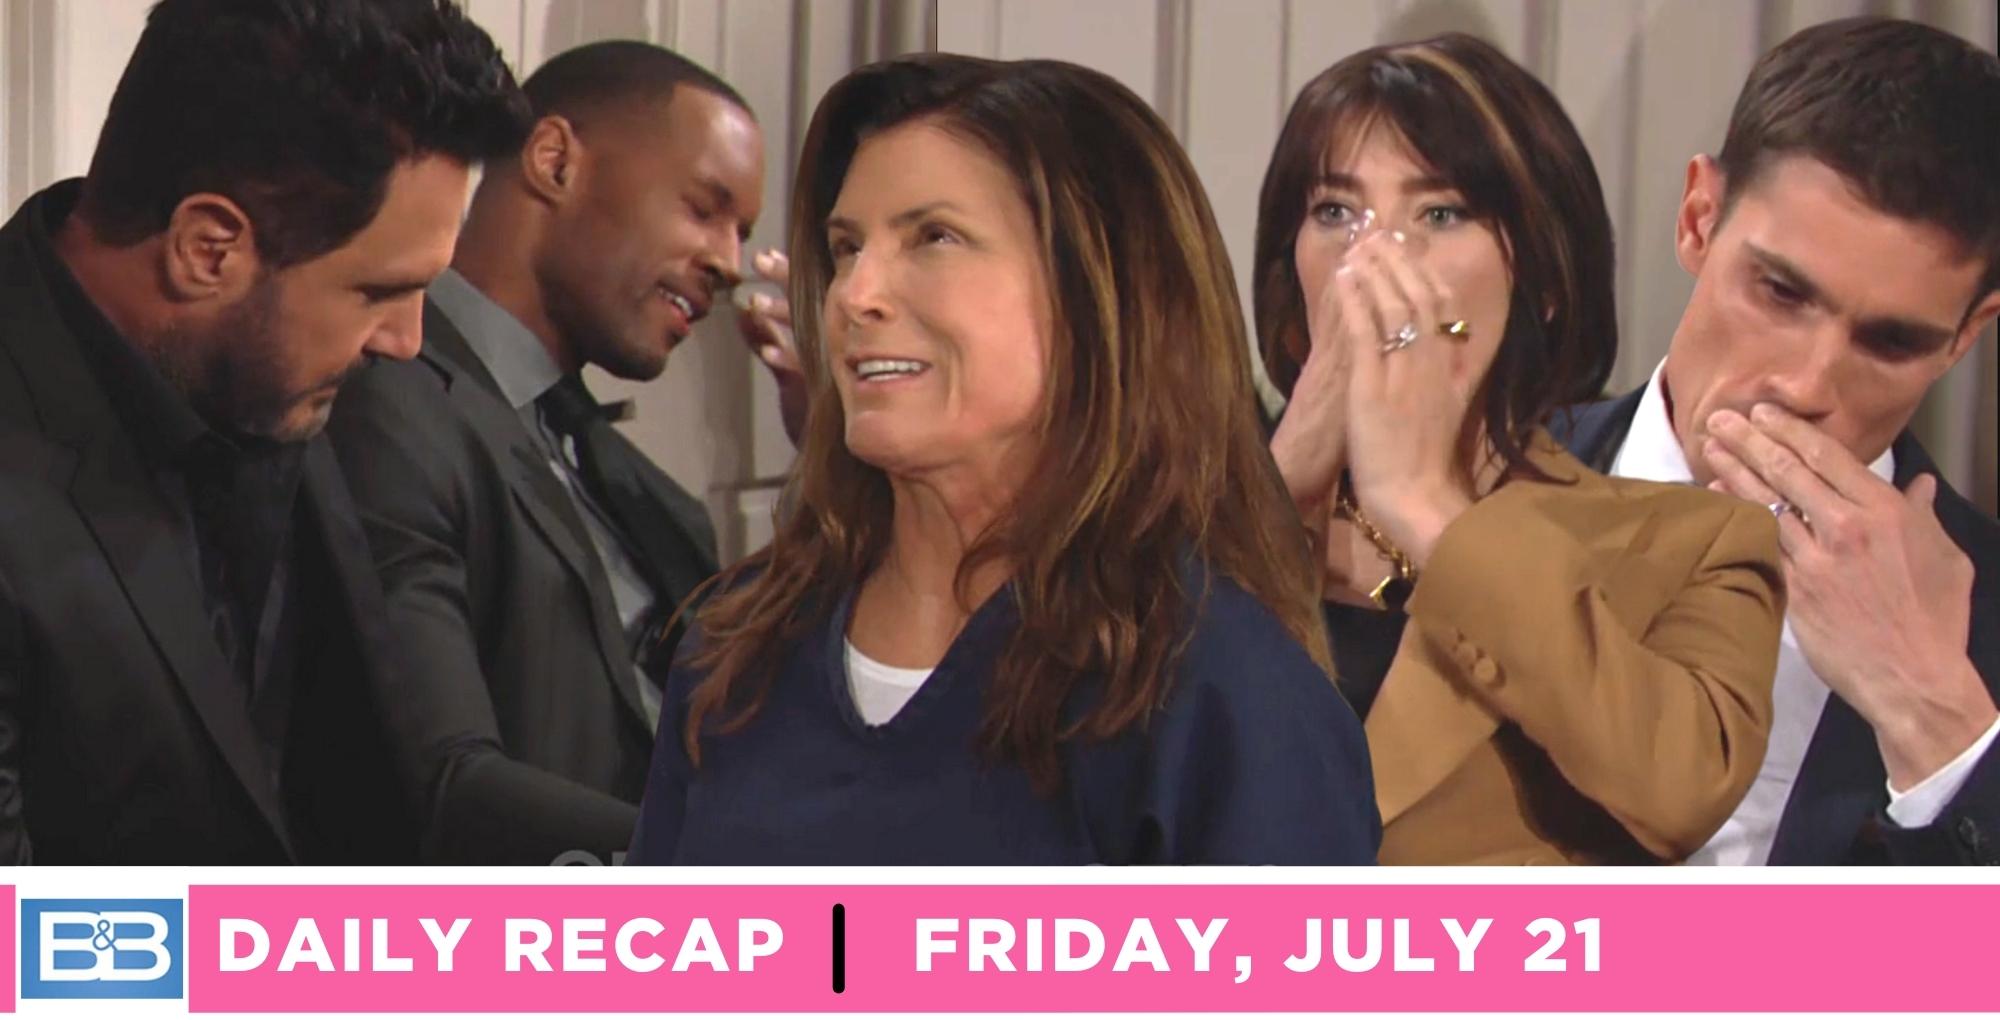 the bold and the beautiful recap for friday, july 21, 2023, sheila carter is freed and no one rejoices.